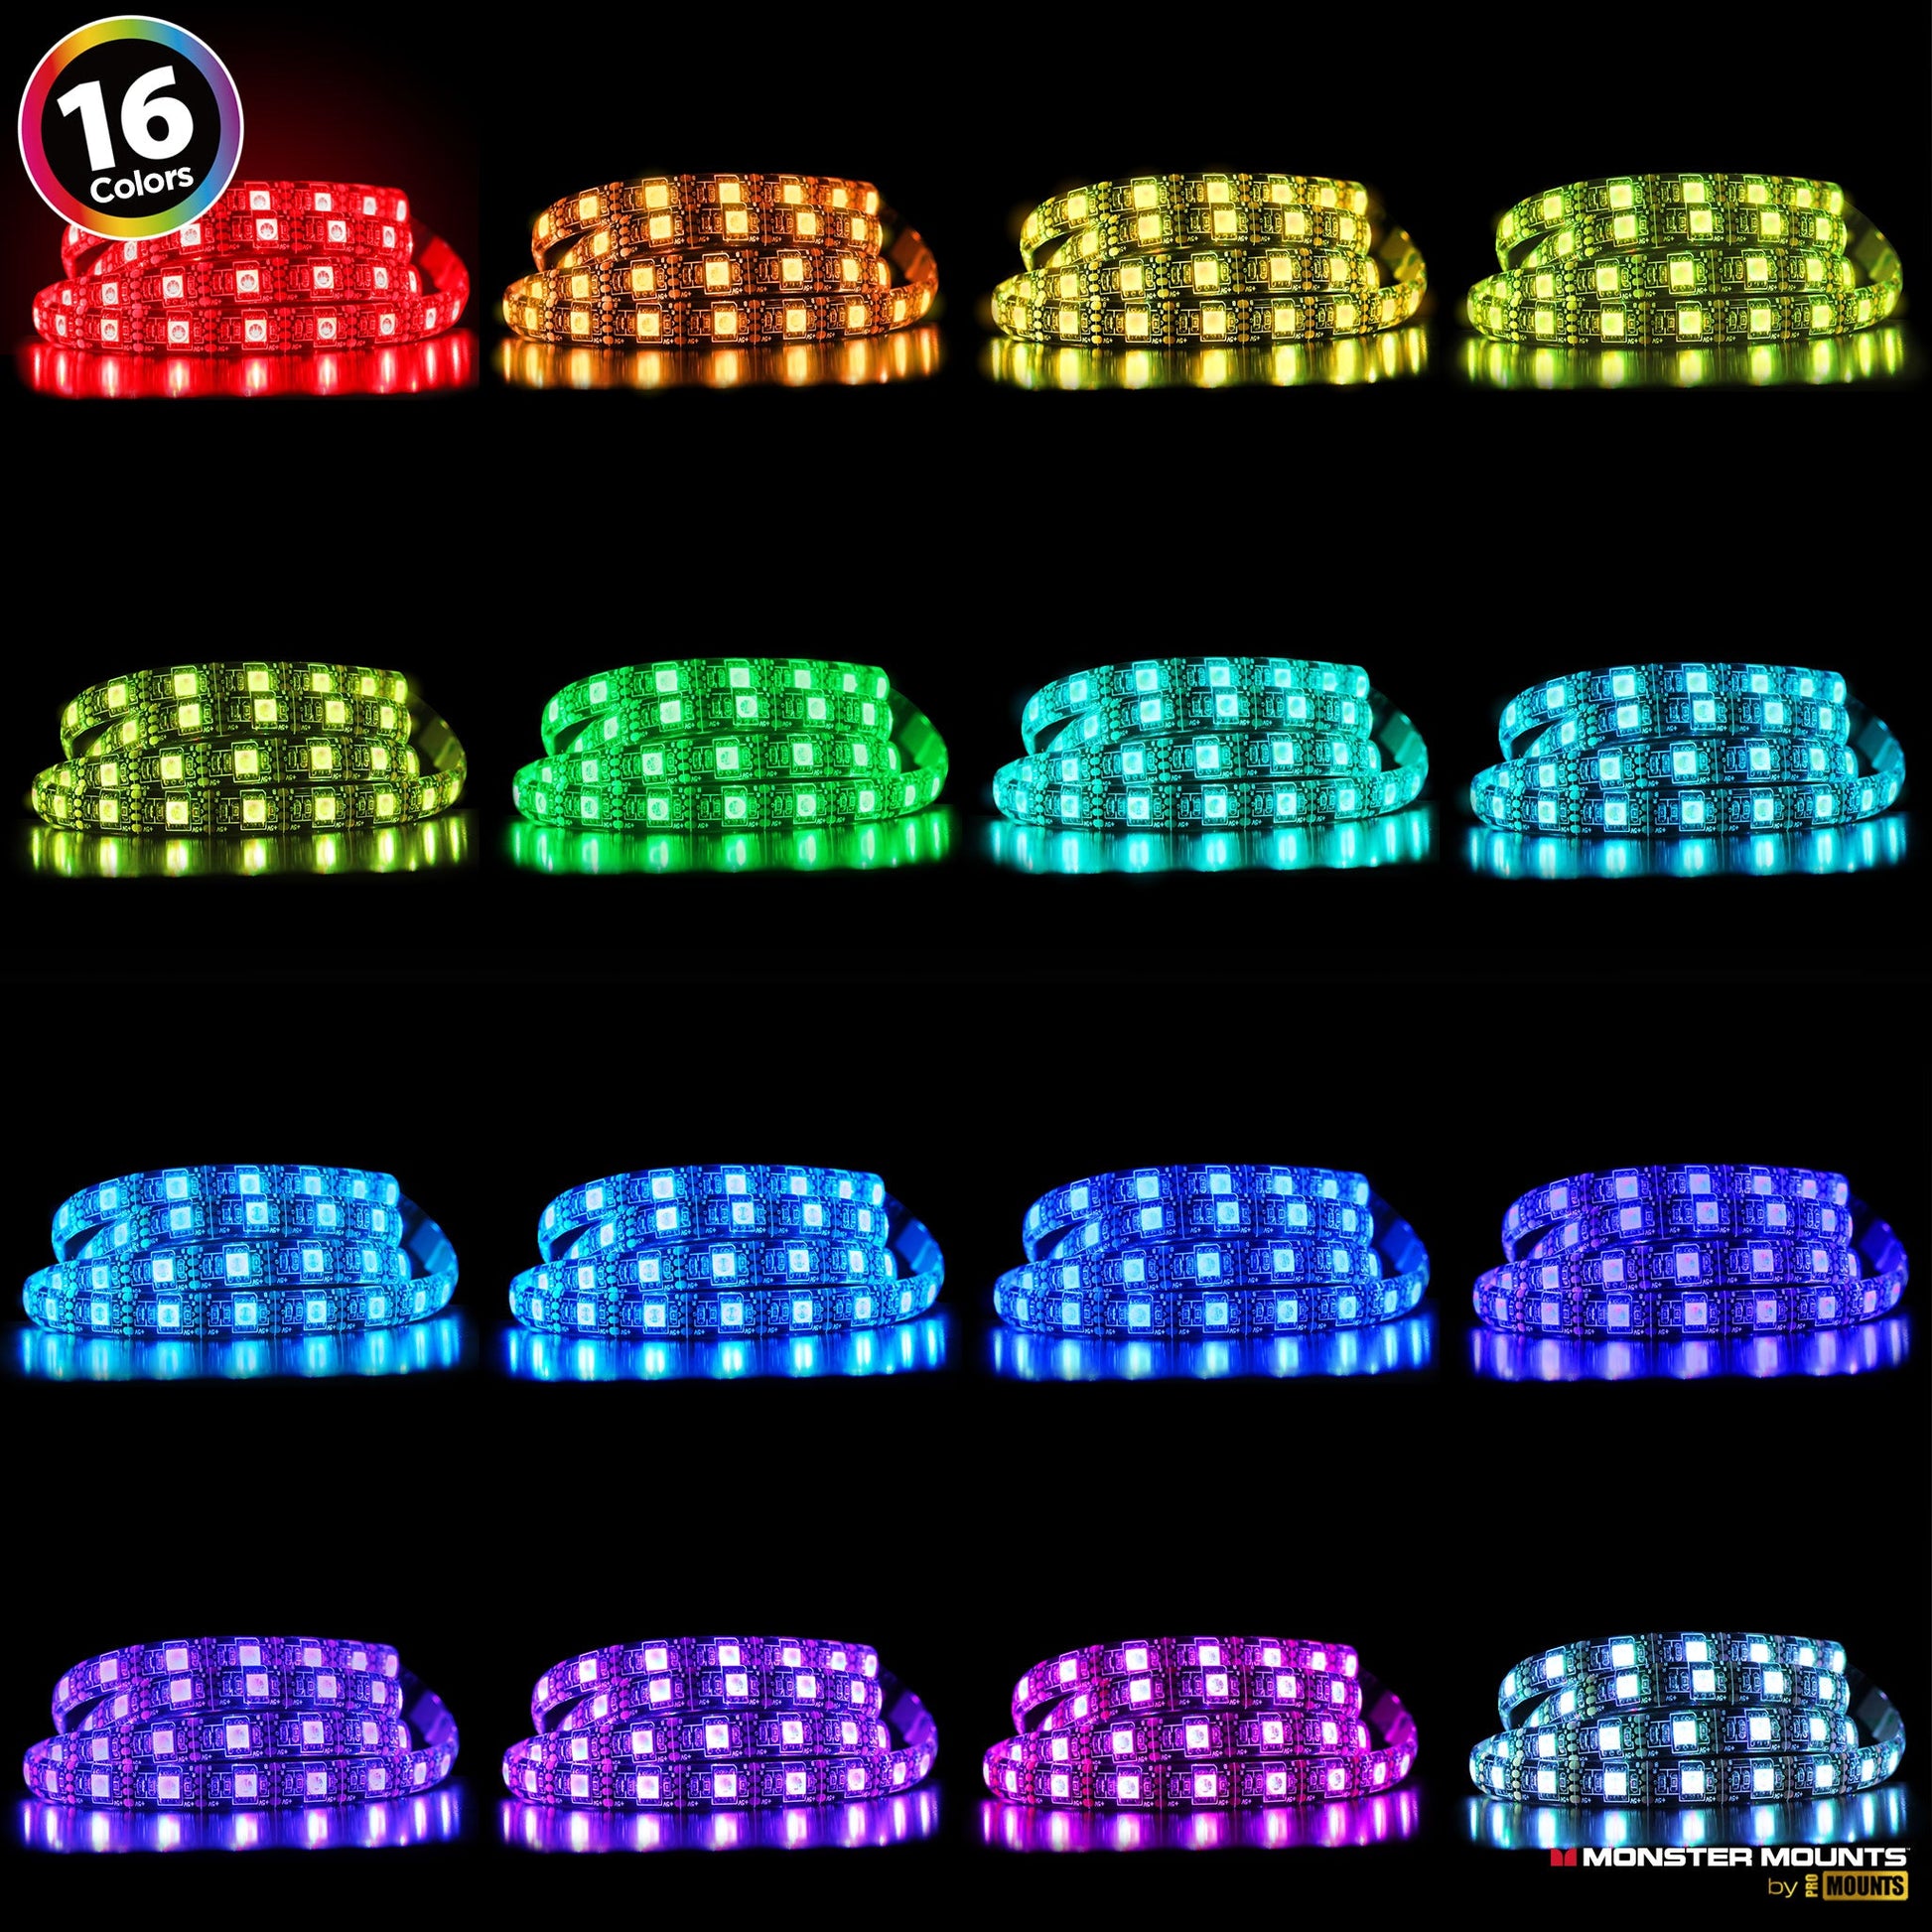 16 Color, 2 Strips LED Lights, TV Backlight Kit with Remote (OTB02) freeshipping - One Products